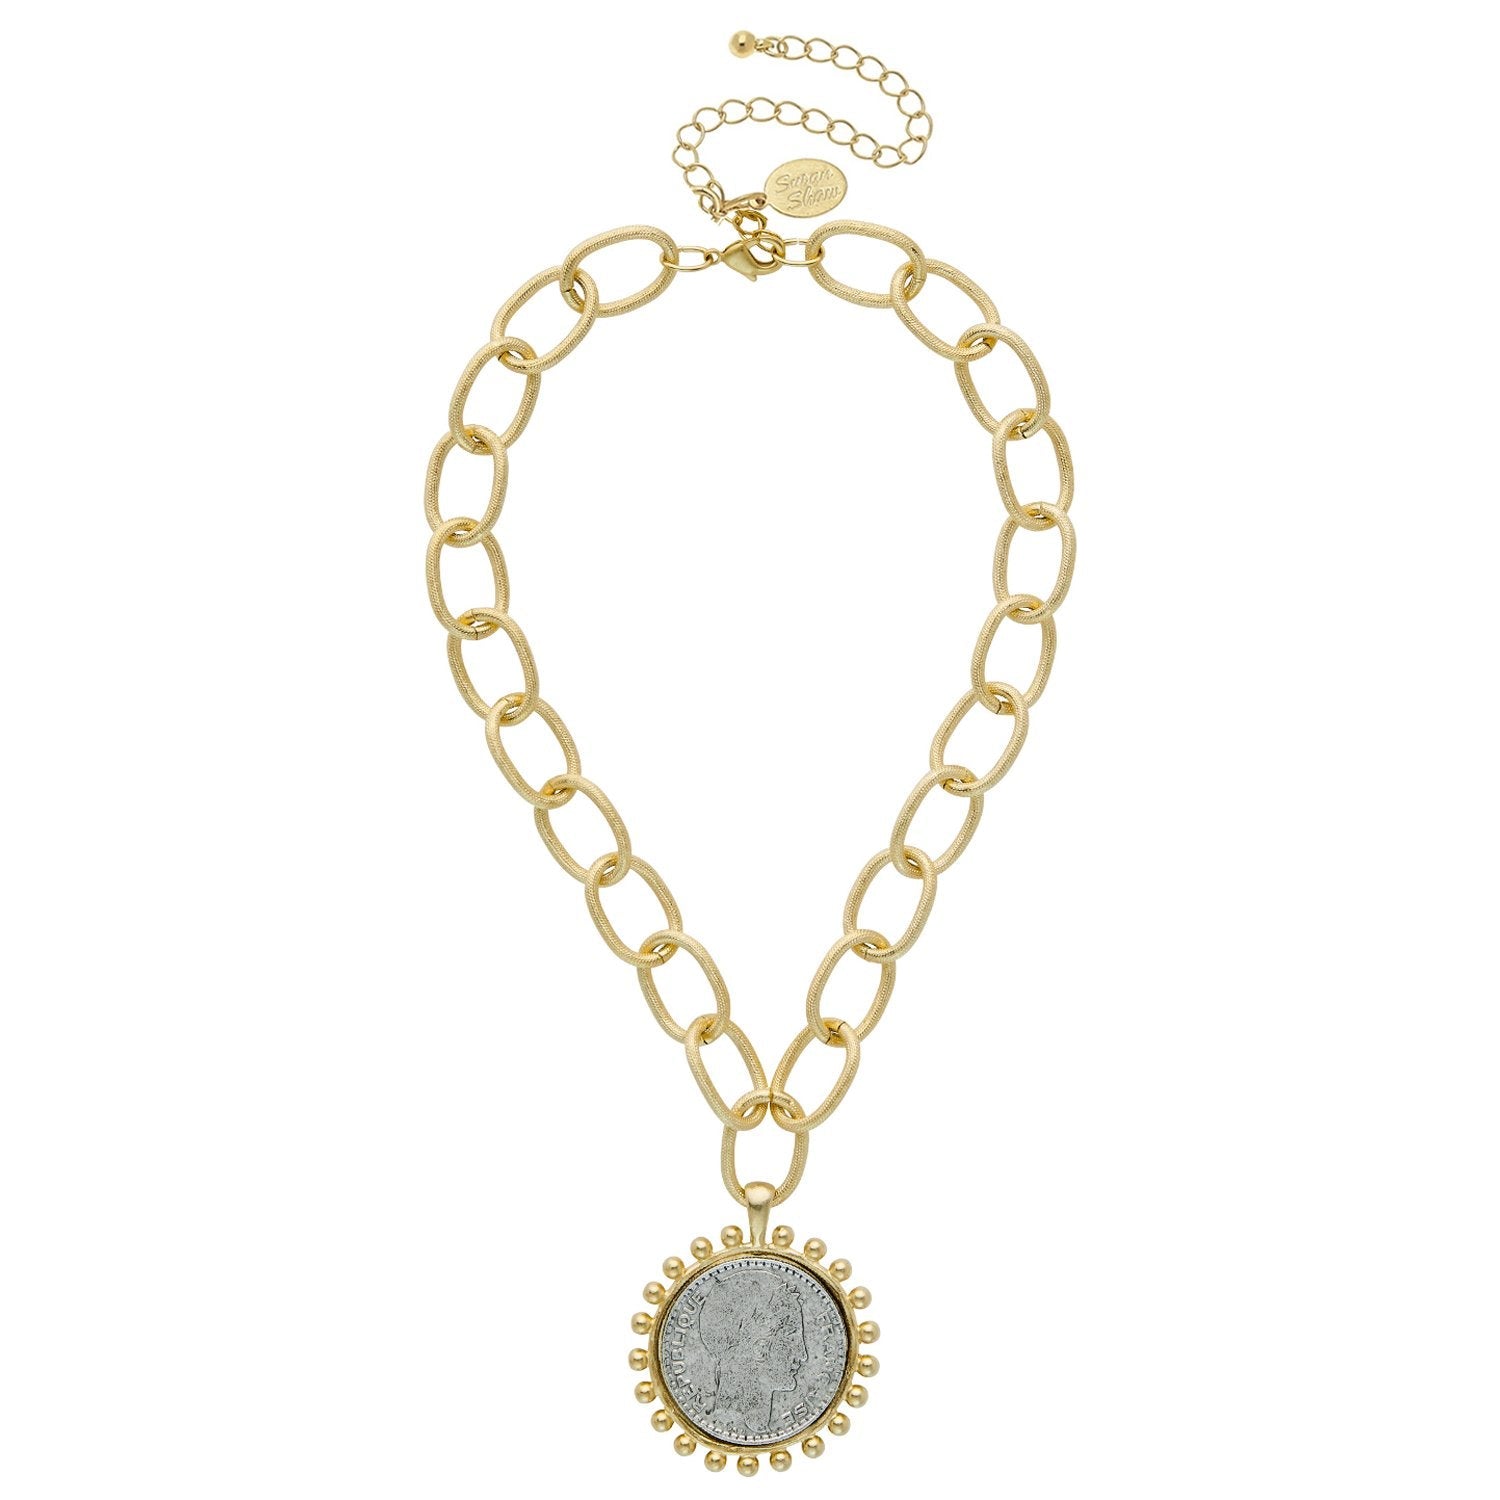 DOTTED COIN PENDANT NECKLACE